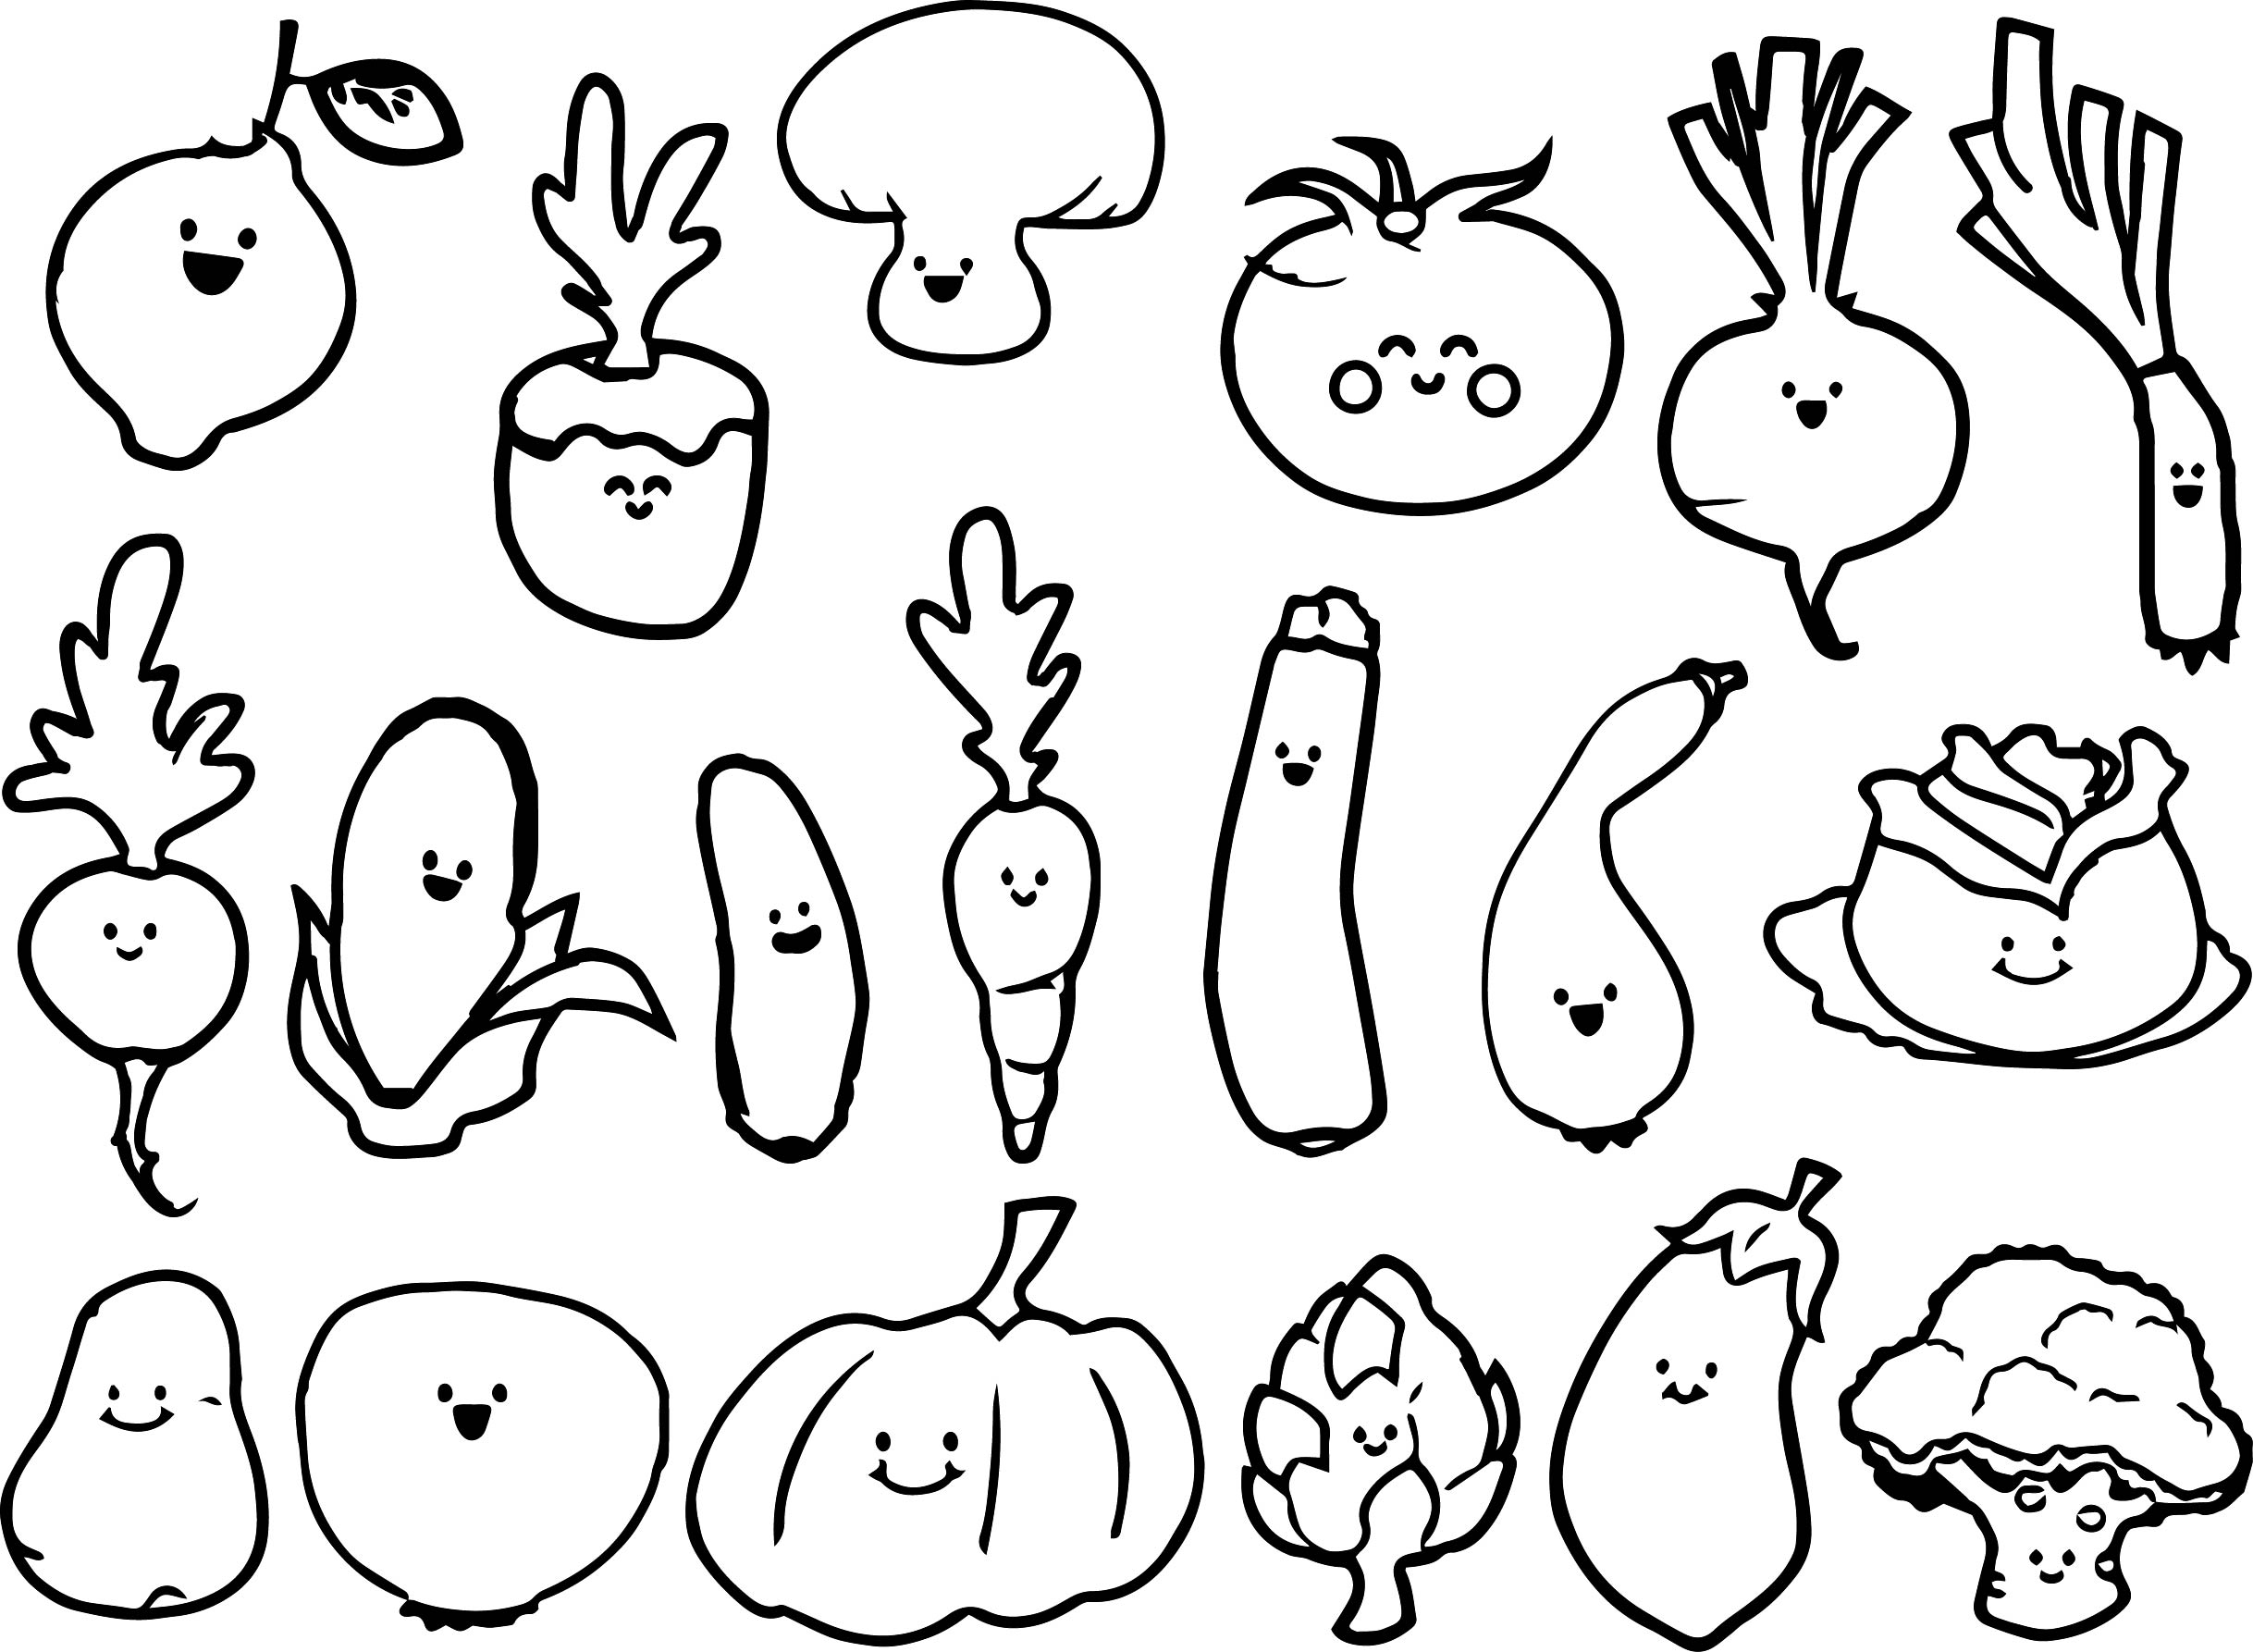 Vegetable Coloring Pages - Best Coloring Pages For Kids